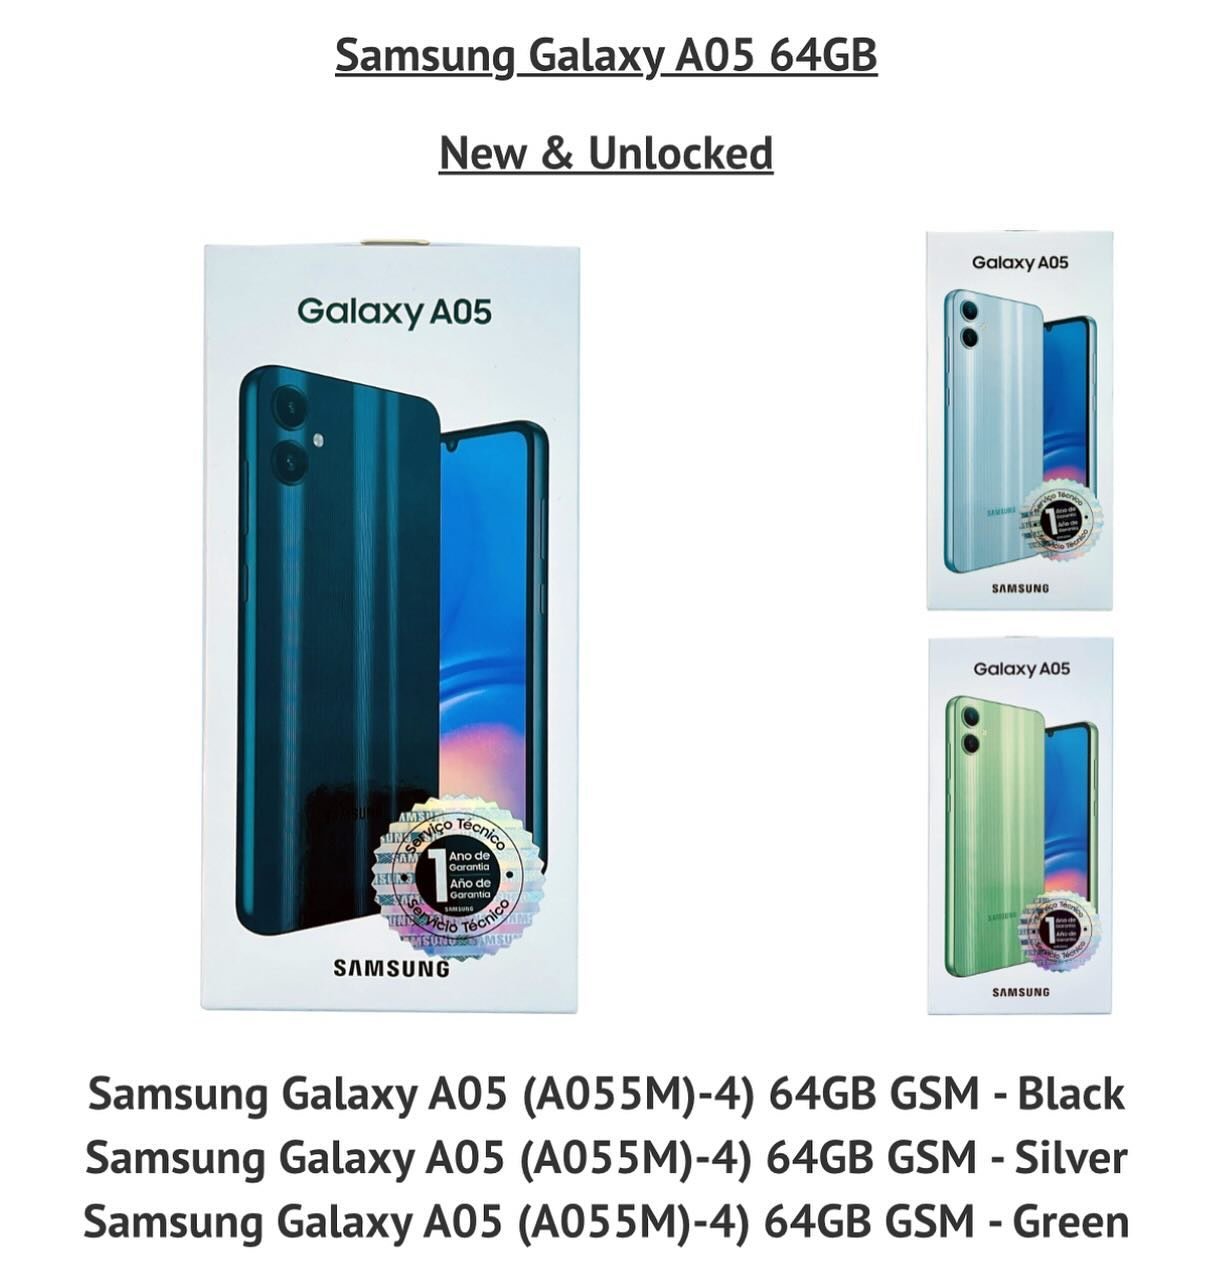 Wholesale only.

New and Unlocked Samsung Galaxy A05.

MOQ required.

Link in bio under HR Wireless.

- #galaxya05 #a05 #samsung #gsm #unlocked #android #wholesale #retailers